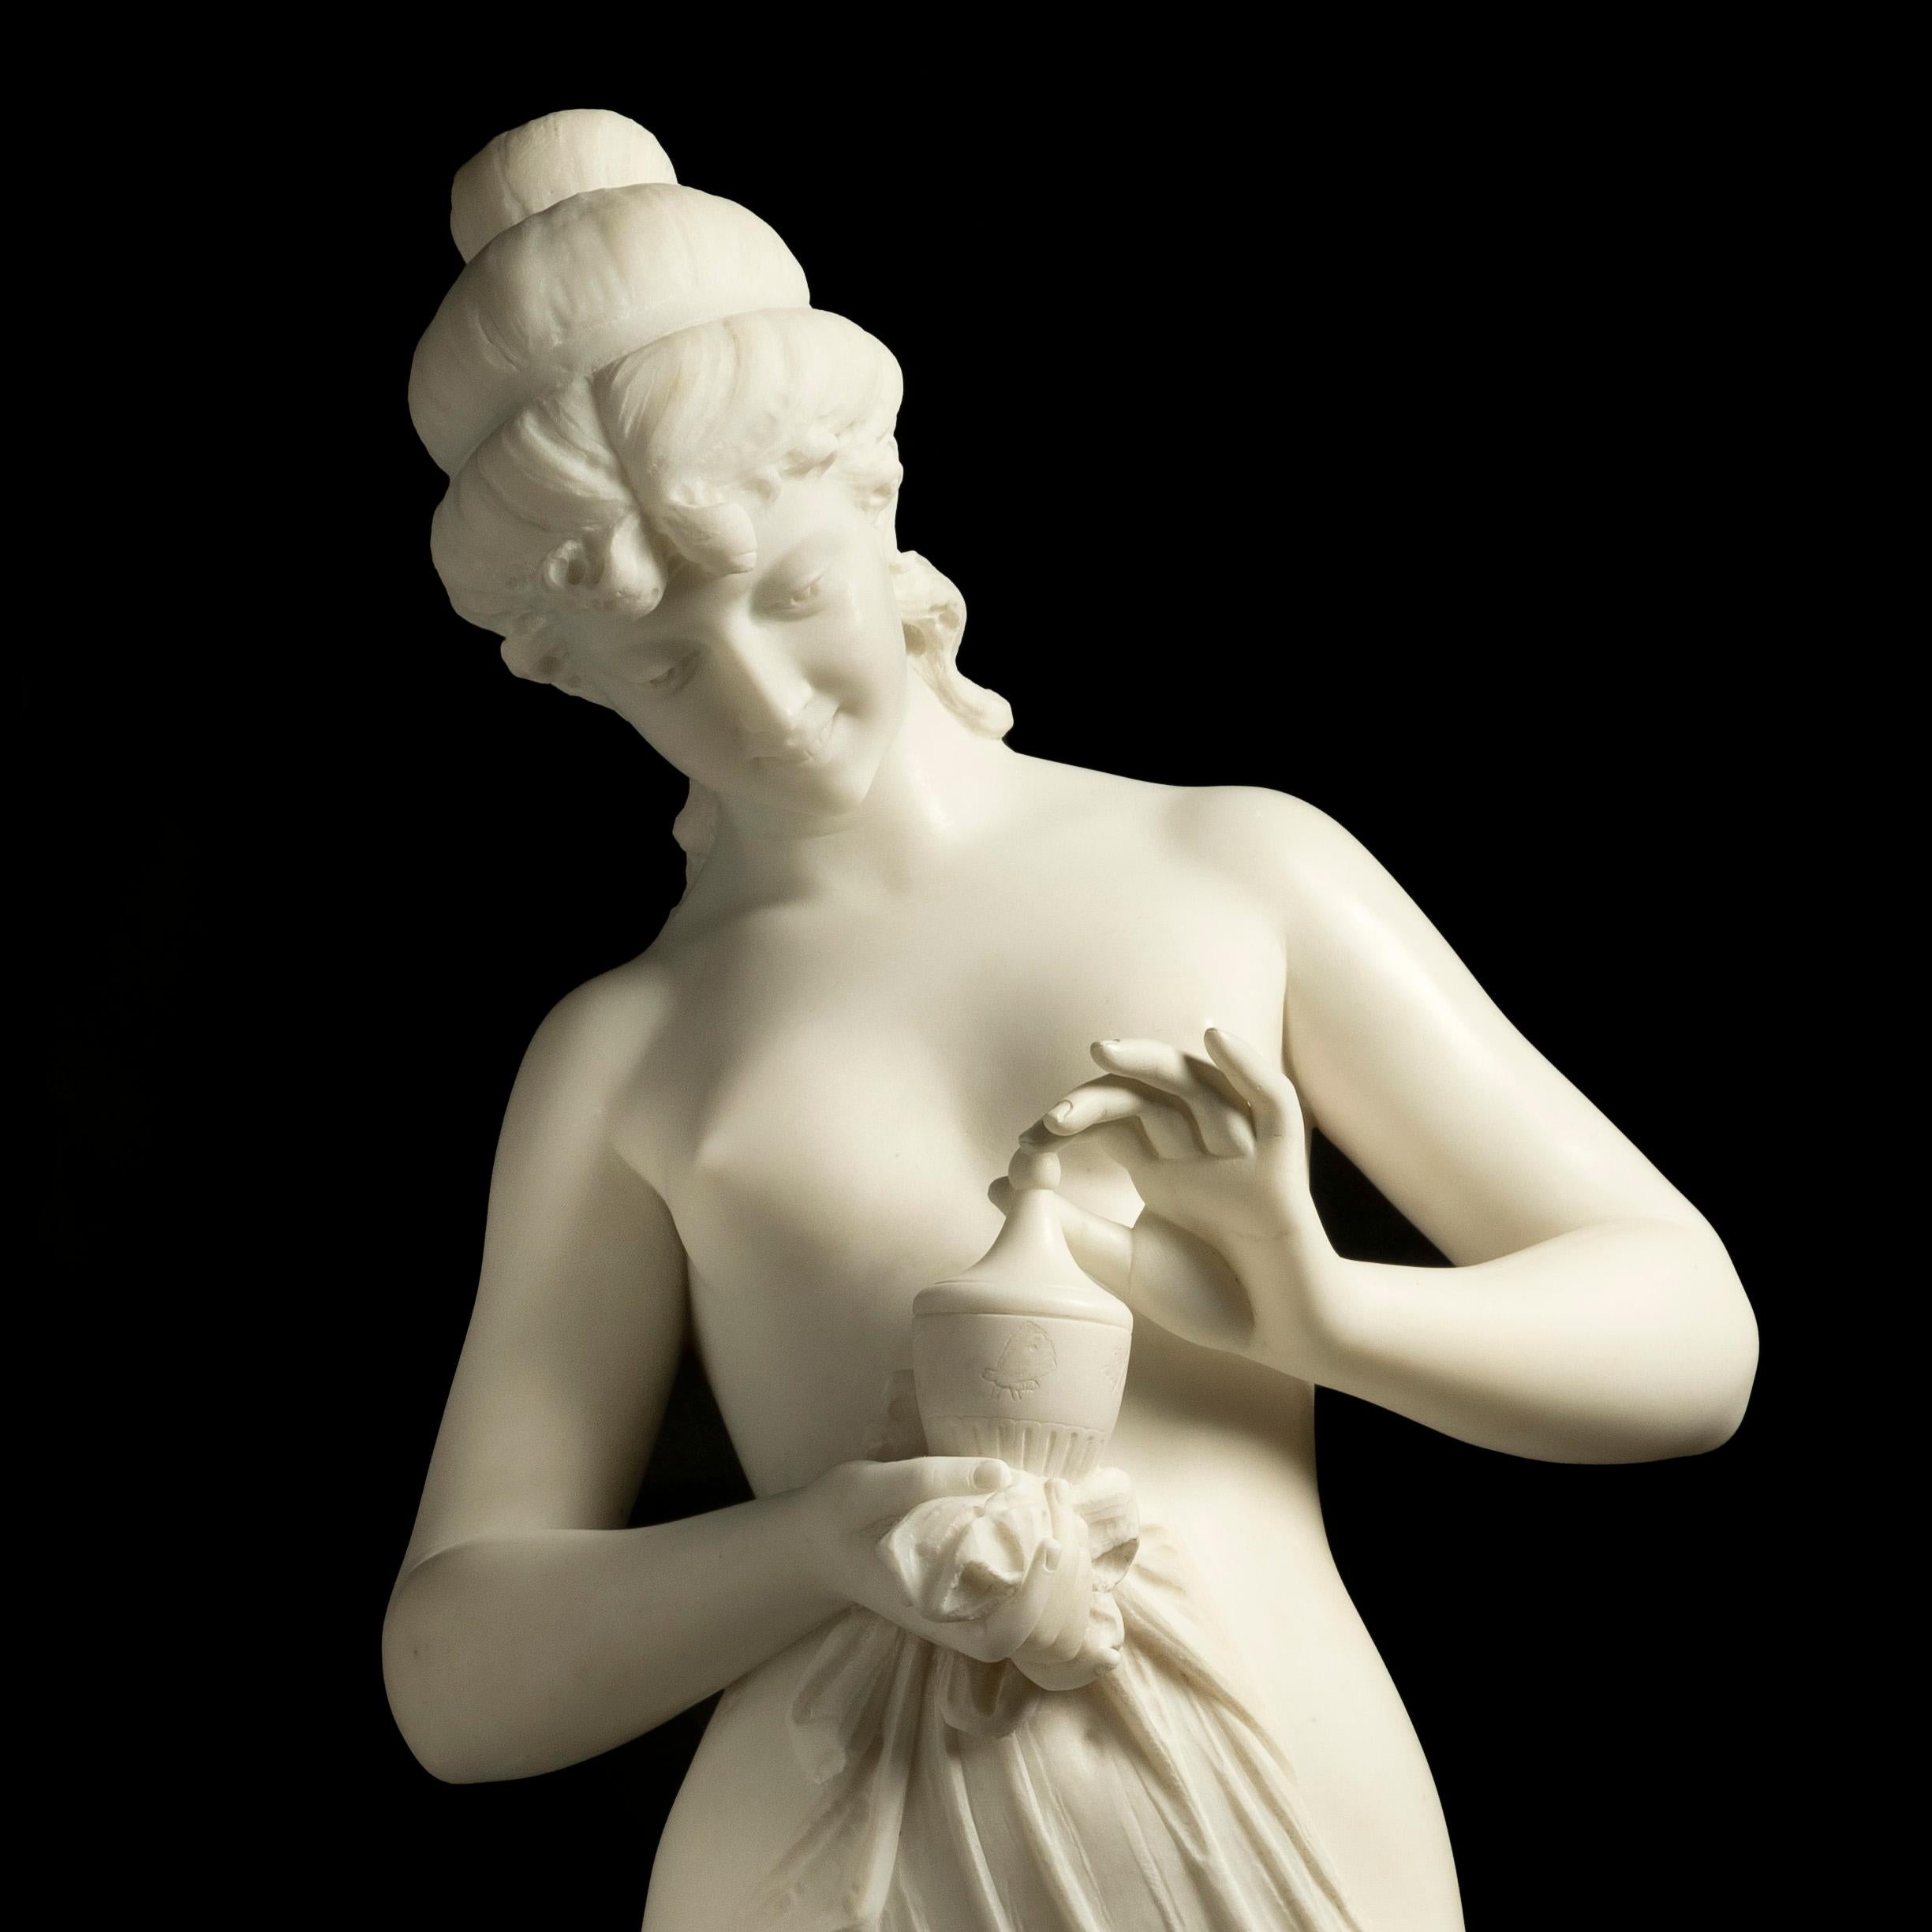 19th Century Italian Nearly Life-Size Marble Sculpture of Pandora by F. Andreini For Sale 5